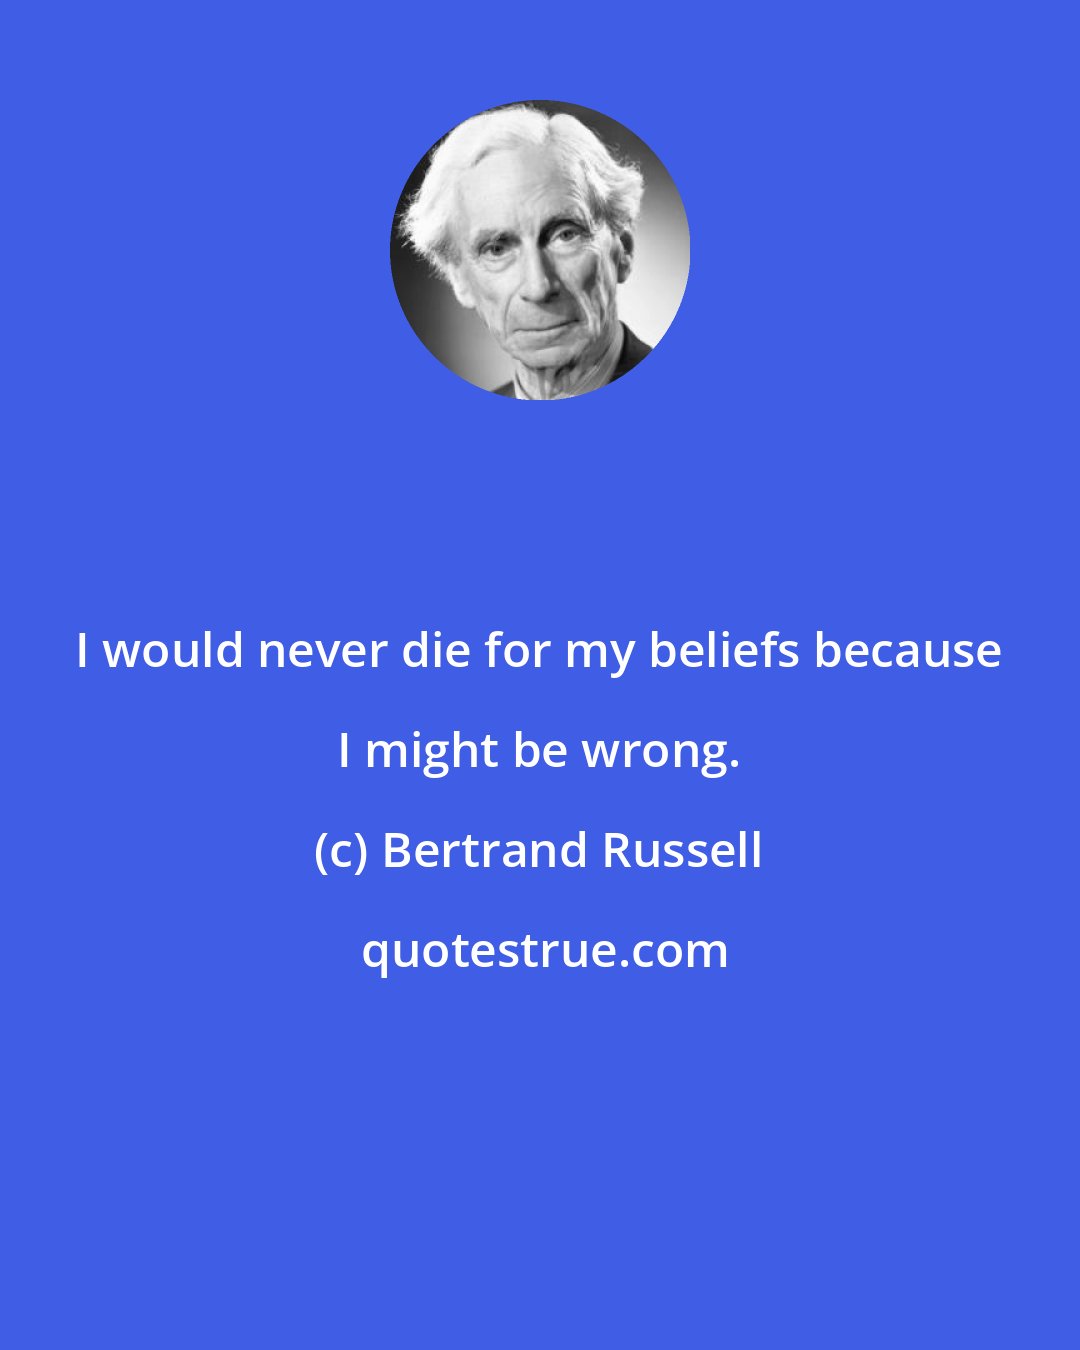 Bertrand Russell: I would never die for my beliefs because I might be wrong.